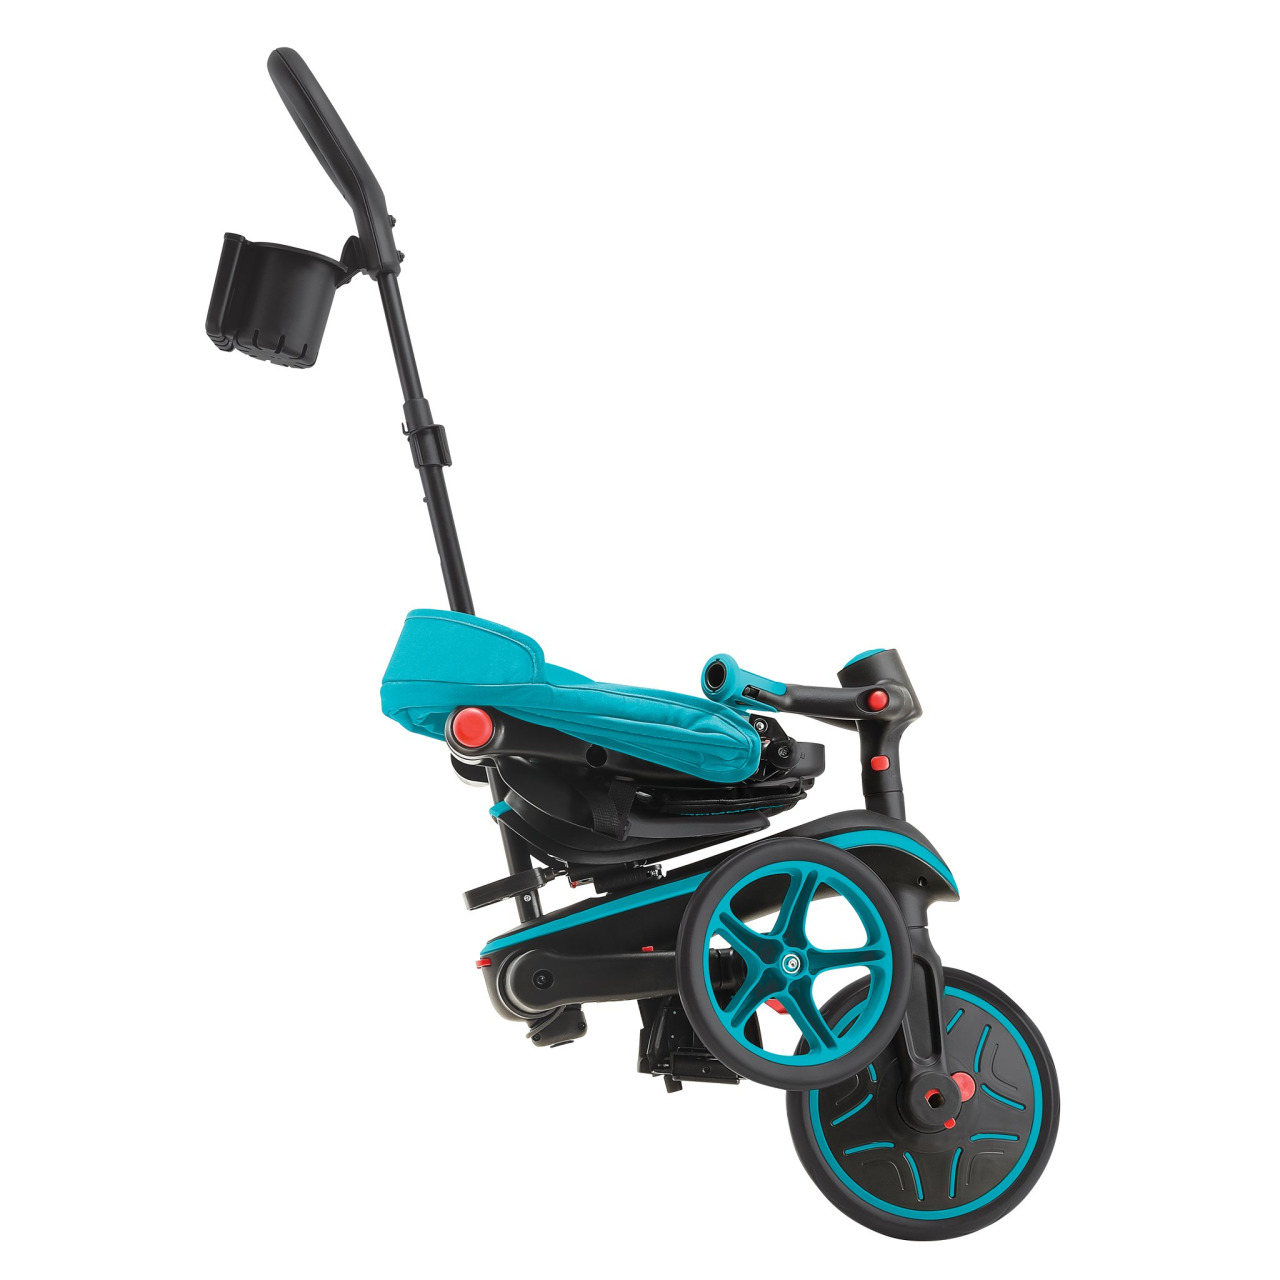 732 105 Convertible Tricycle Trolley